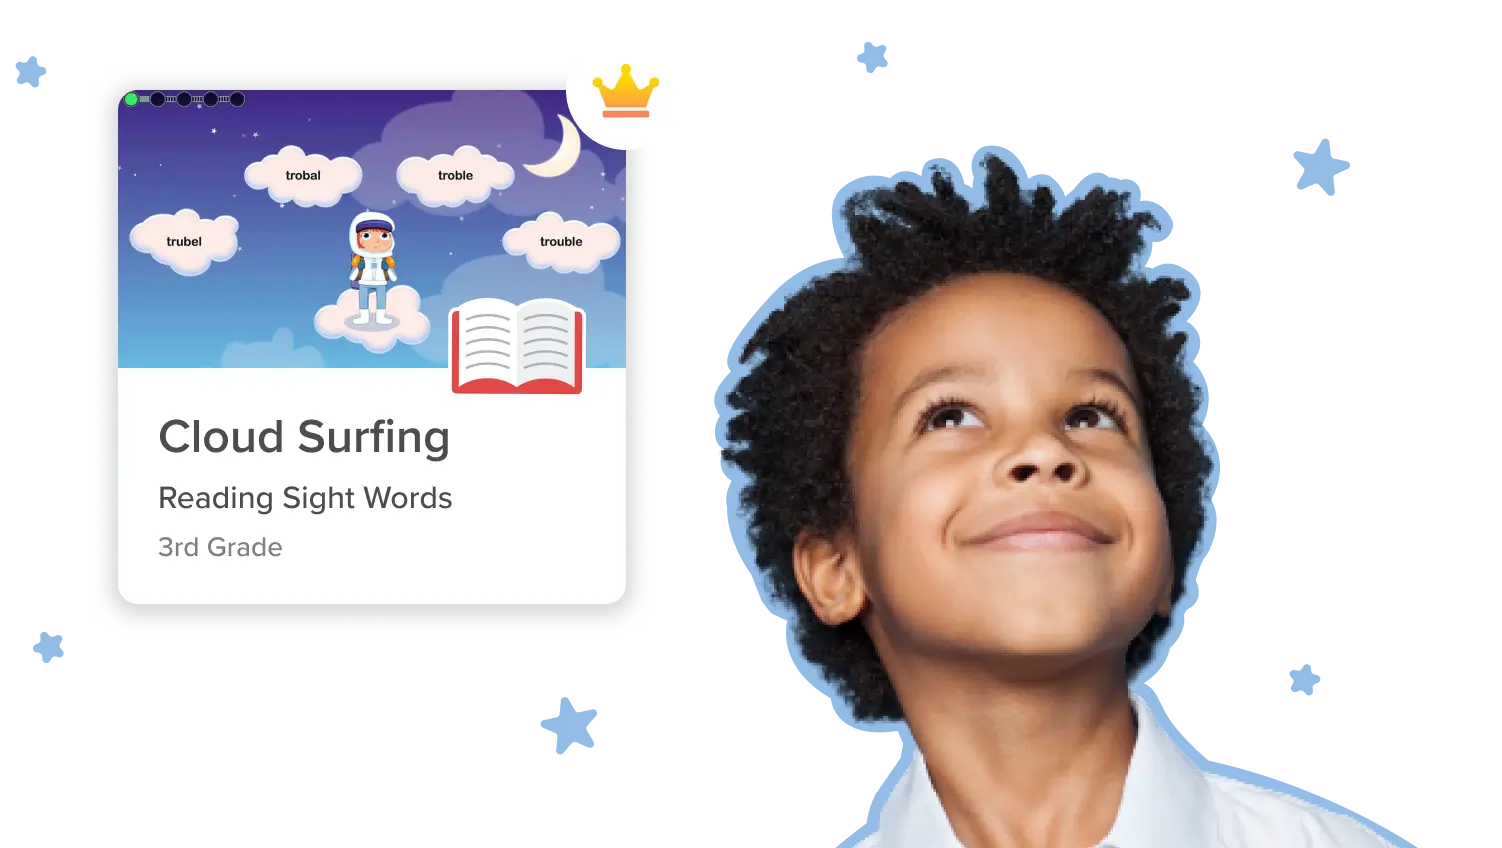 an example card showing a third grade eSpark activity called Cloud Surfing